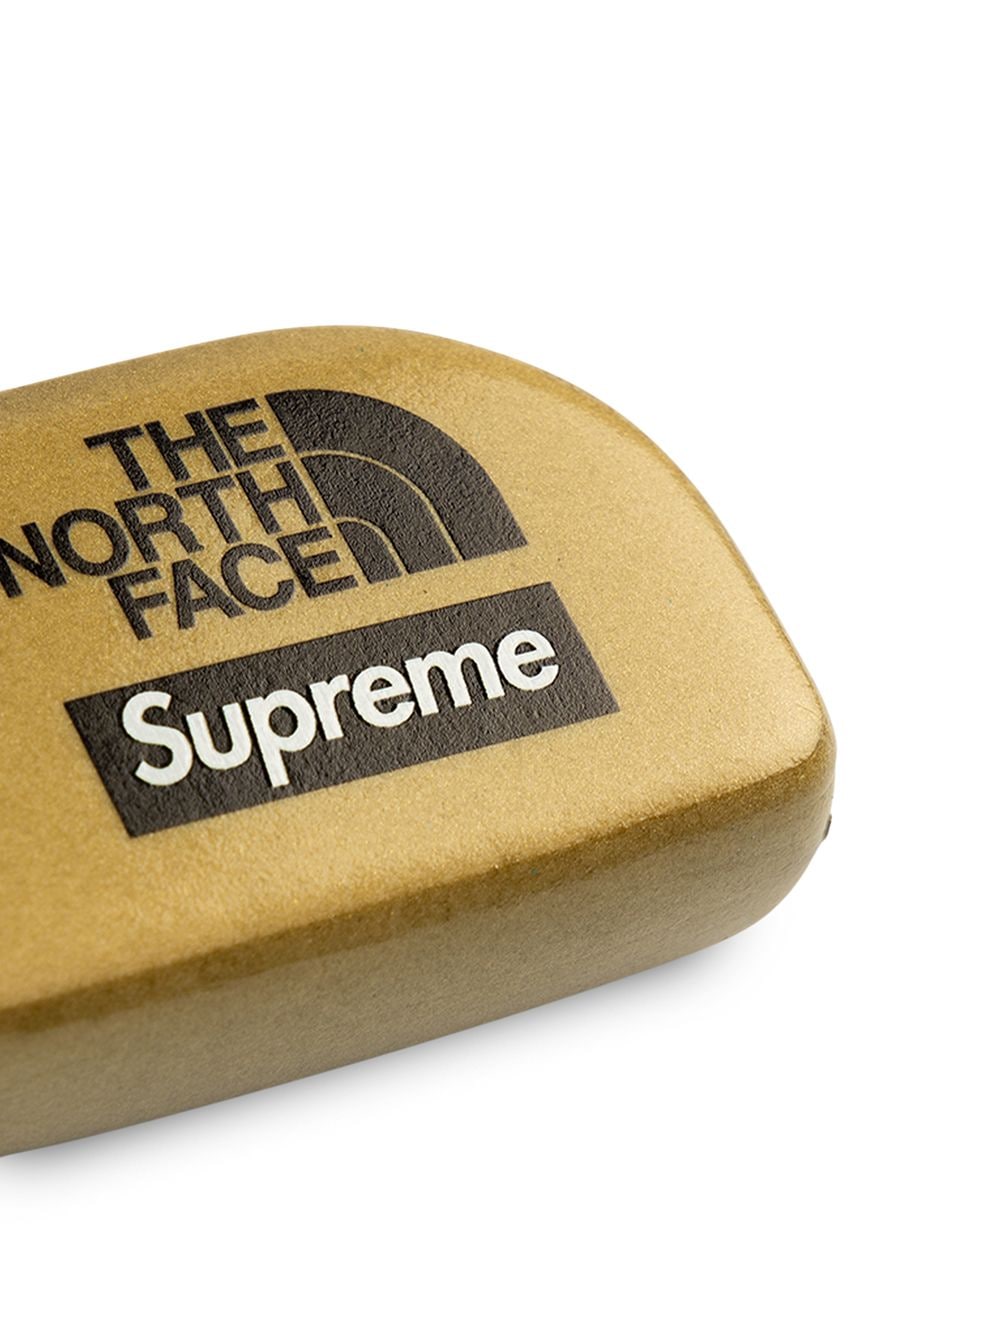 Supreme x The North Face Floating Keychain - Farfetch